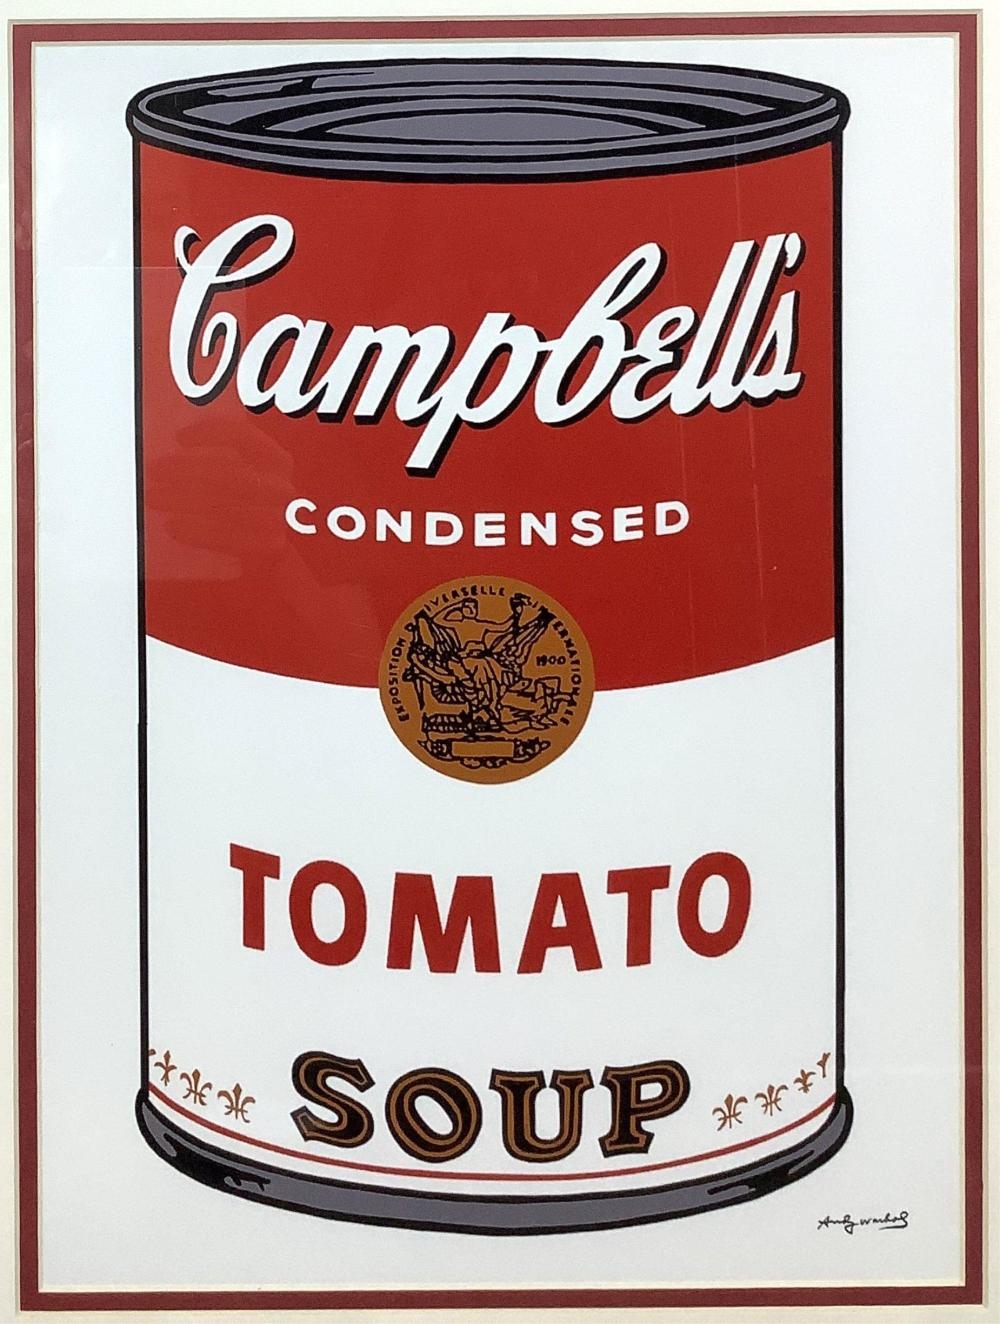 Andy Warhol “Campbell's Tomato Soup Can” Print - Andy Warhol